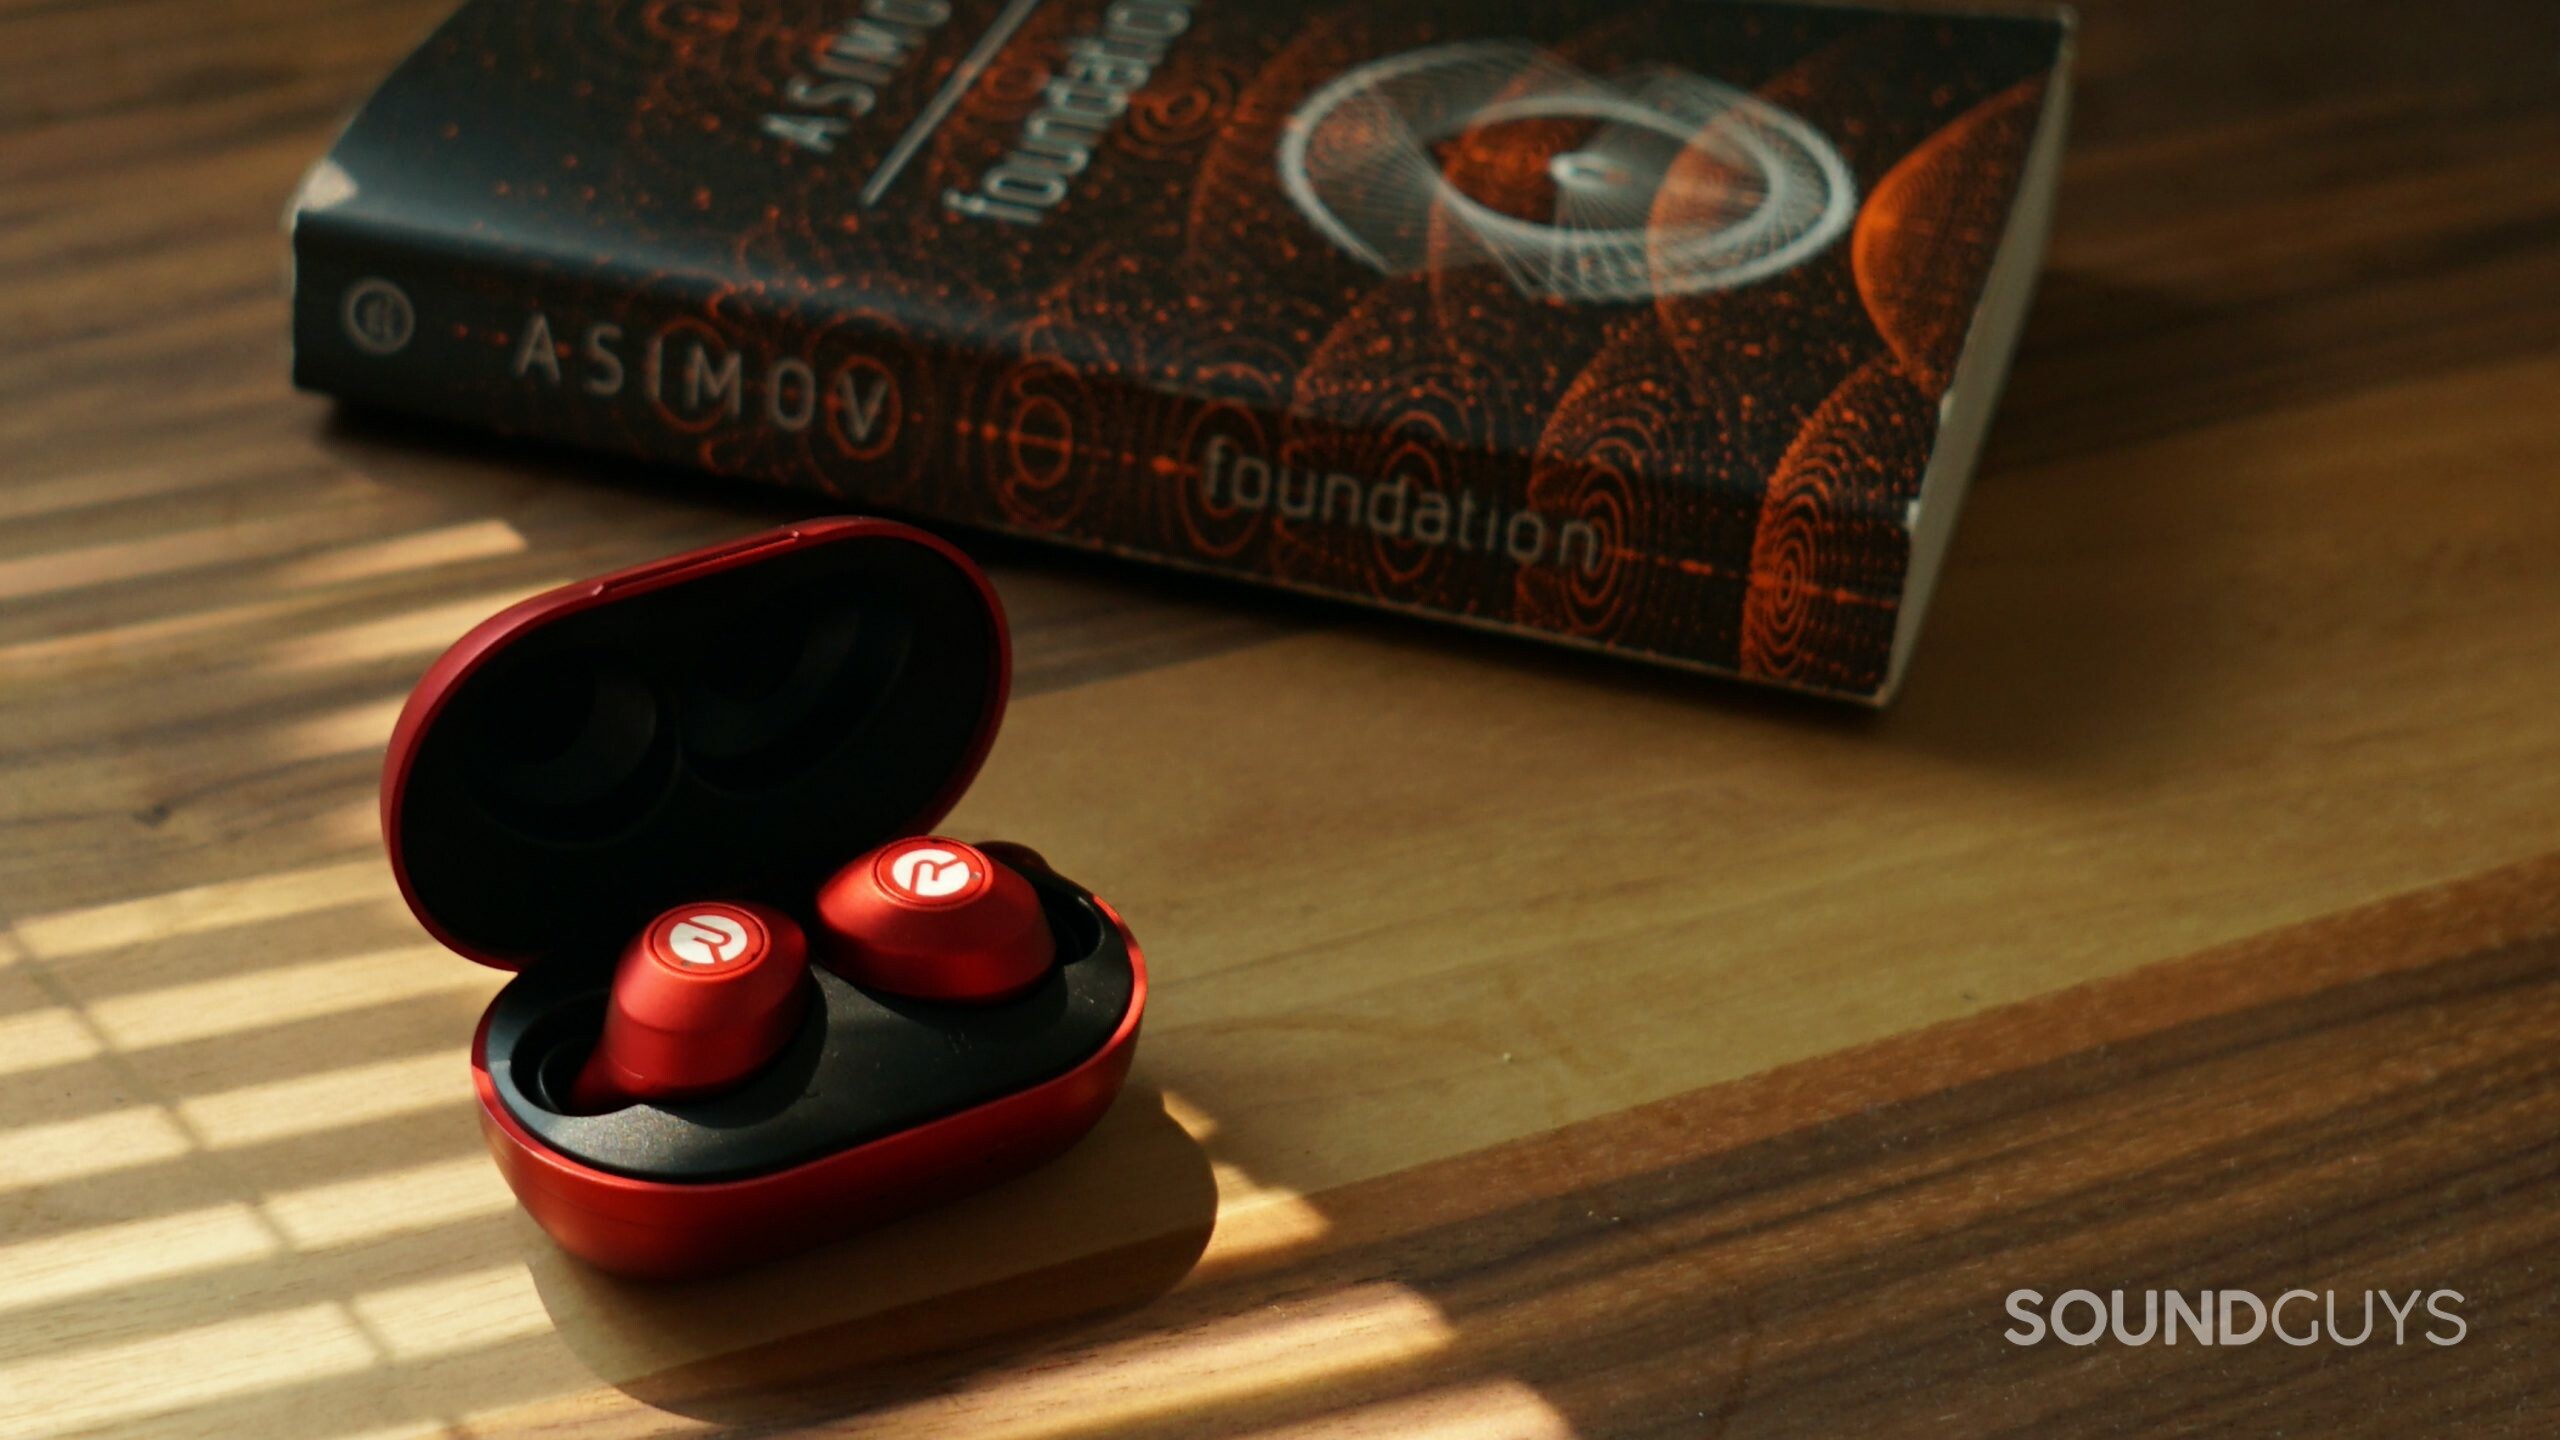 The Raycon Everyday Earbuds sit in their open charging case on a wooden table next to a copy of a Foundation by Isaac Asimov.